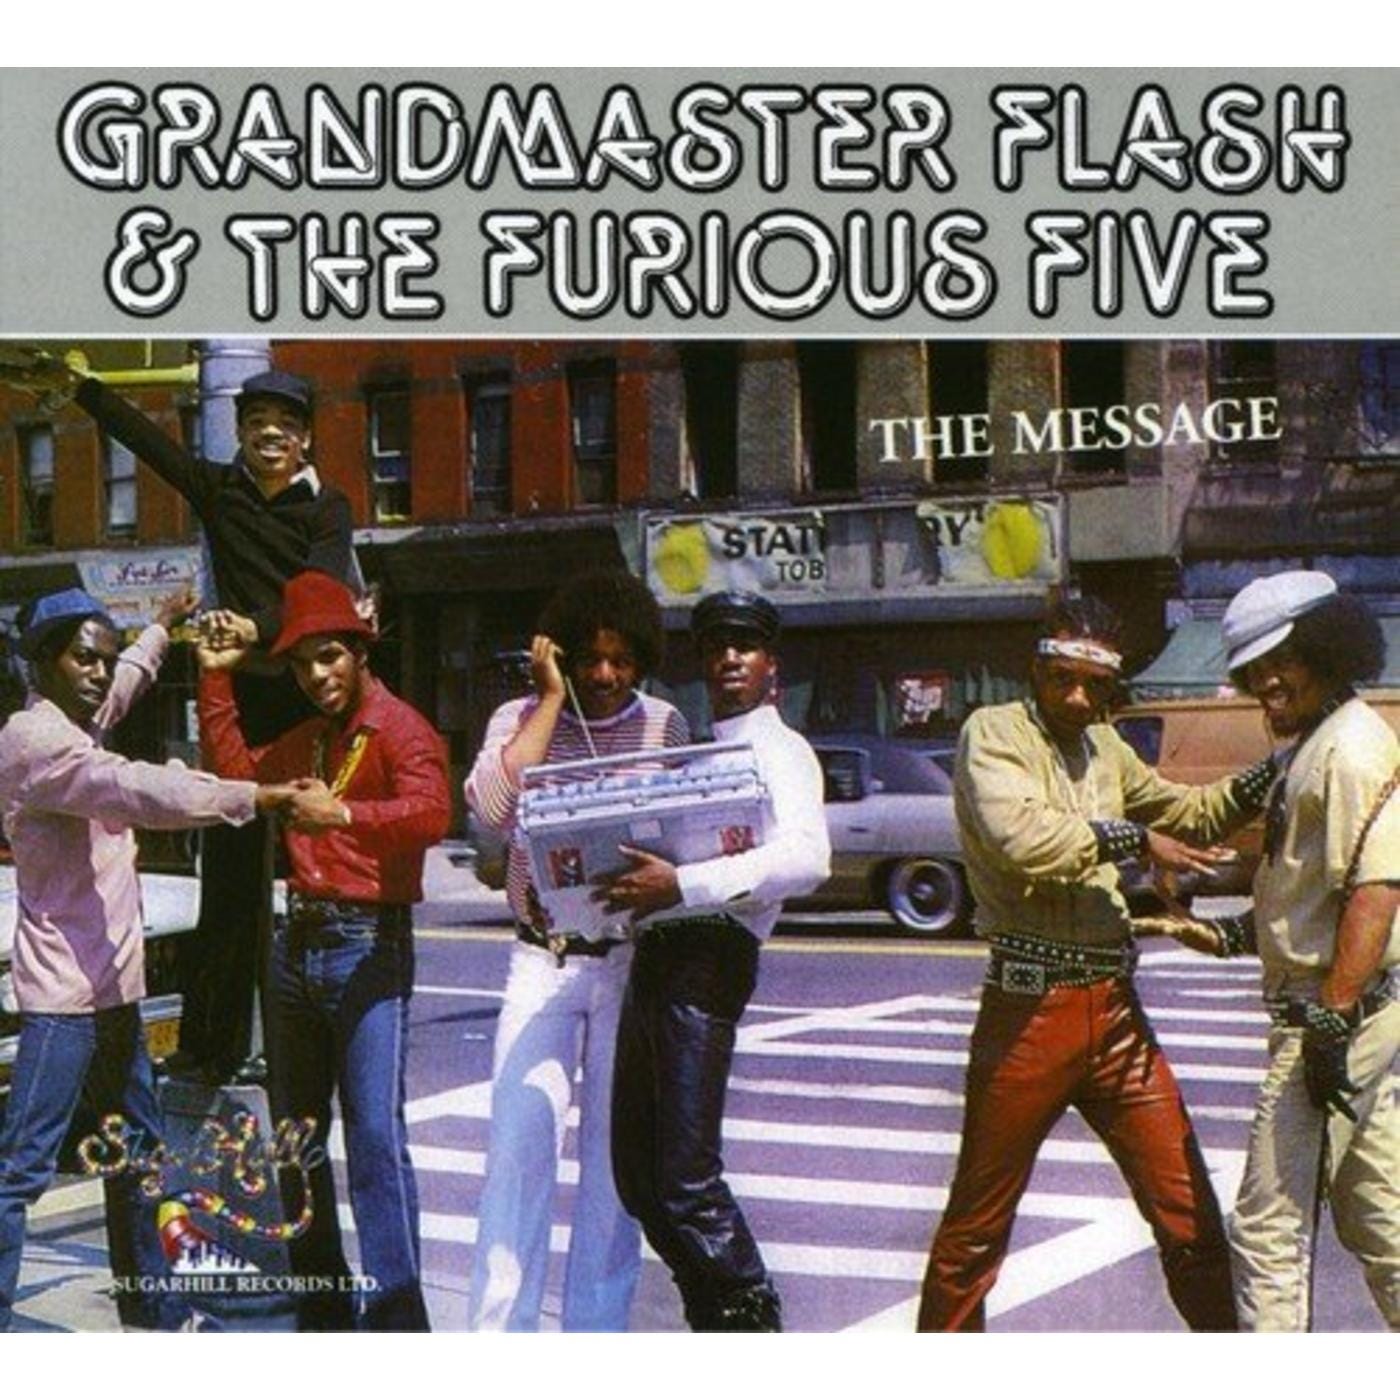 Grandmasters Podcast with Melle Mel and Grandmaster Caz